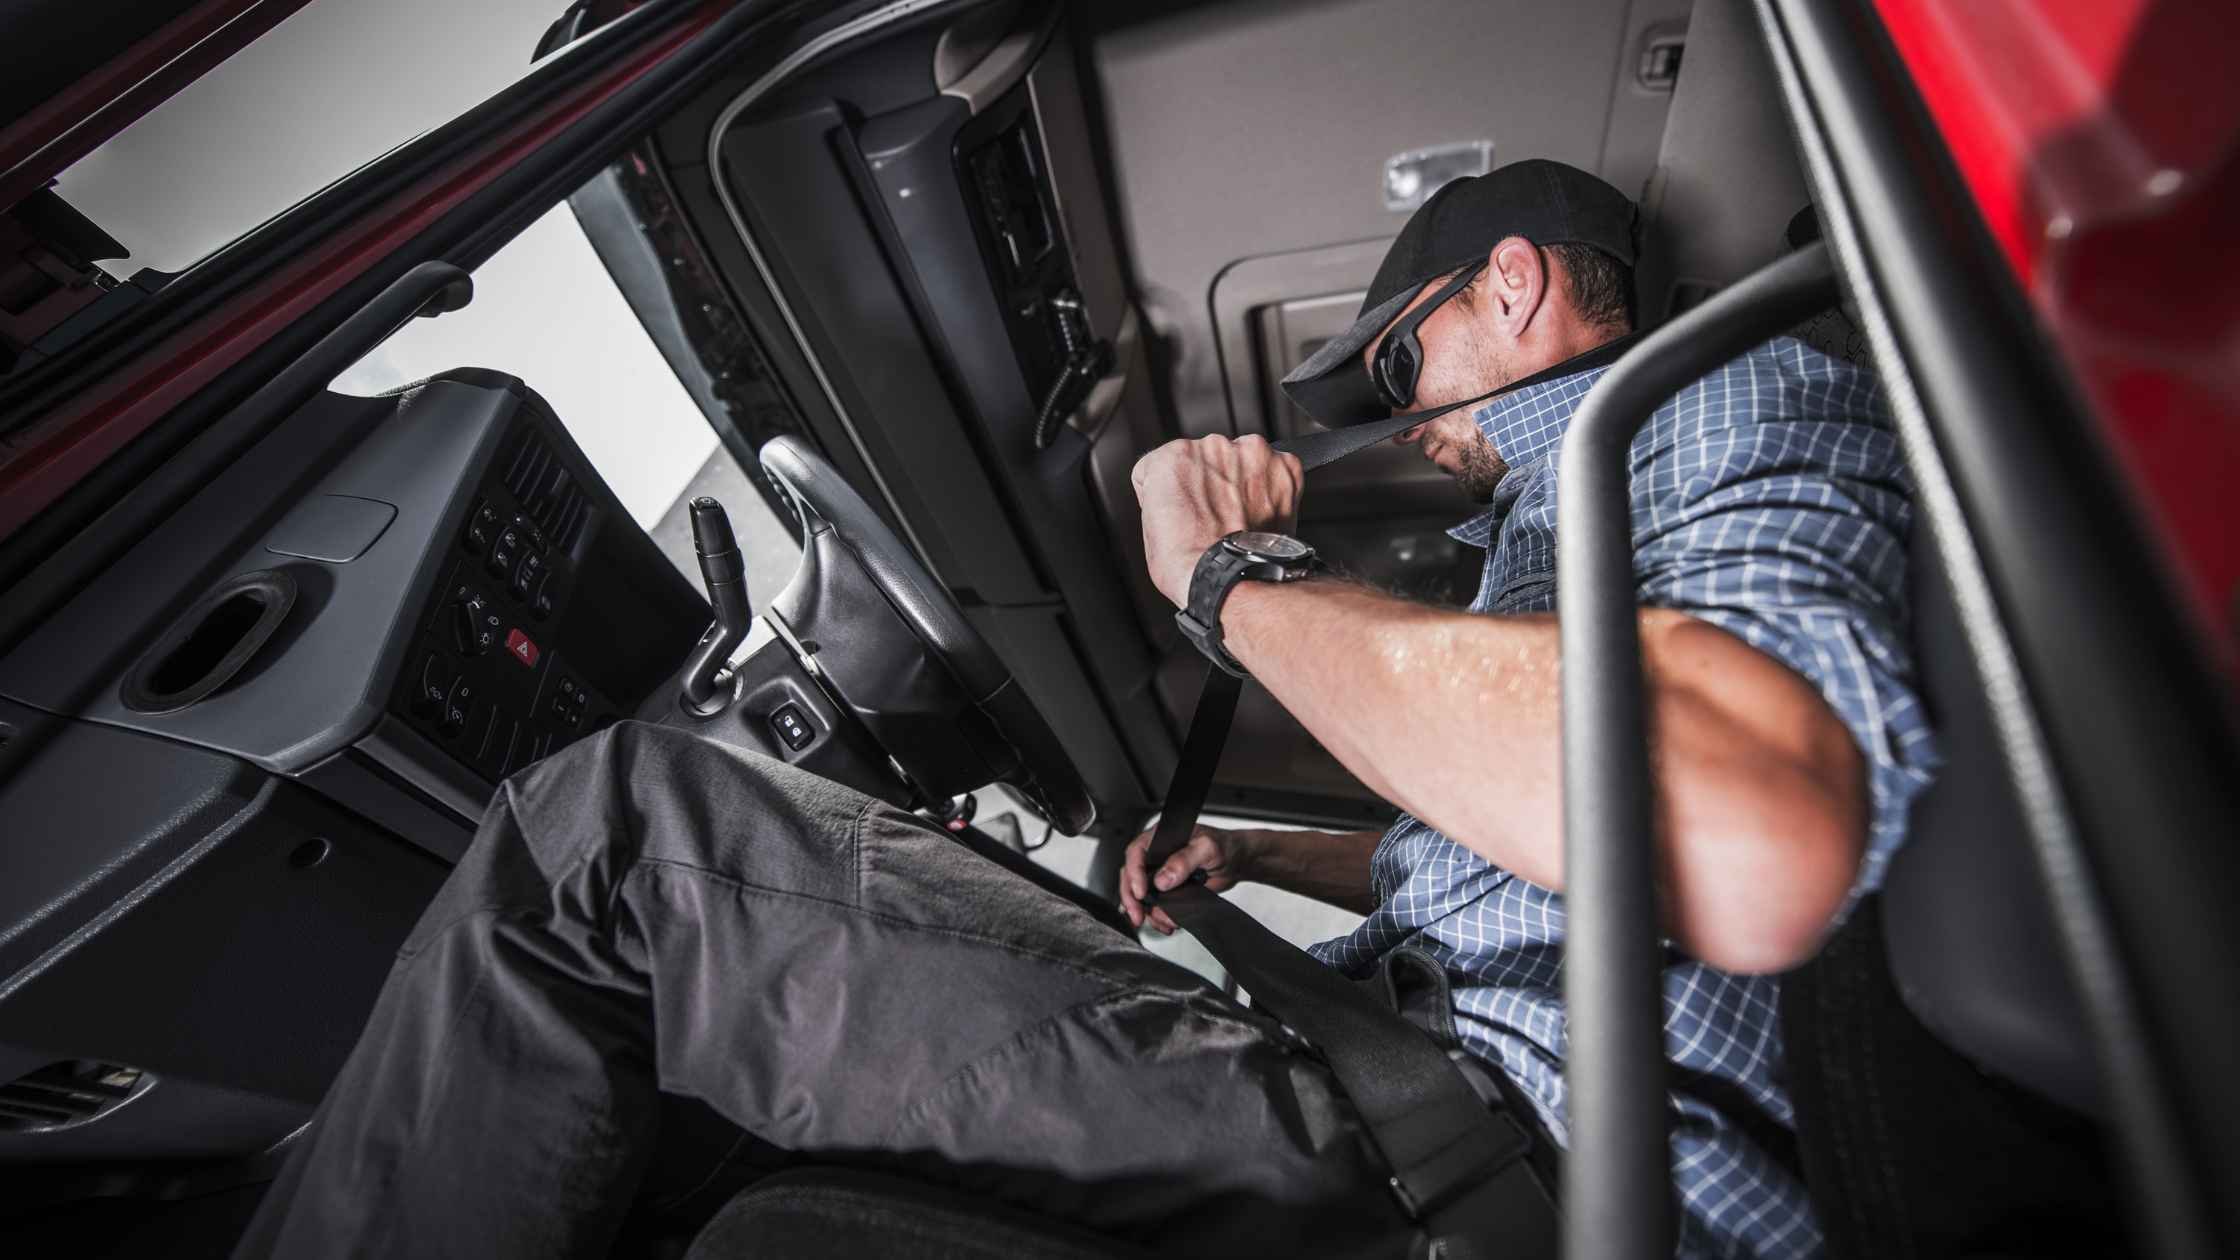 7 Essential Accessories for Trucks and Truckers